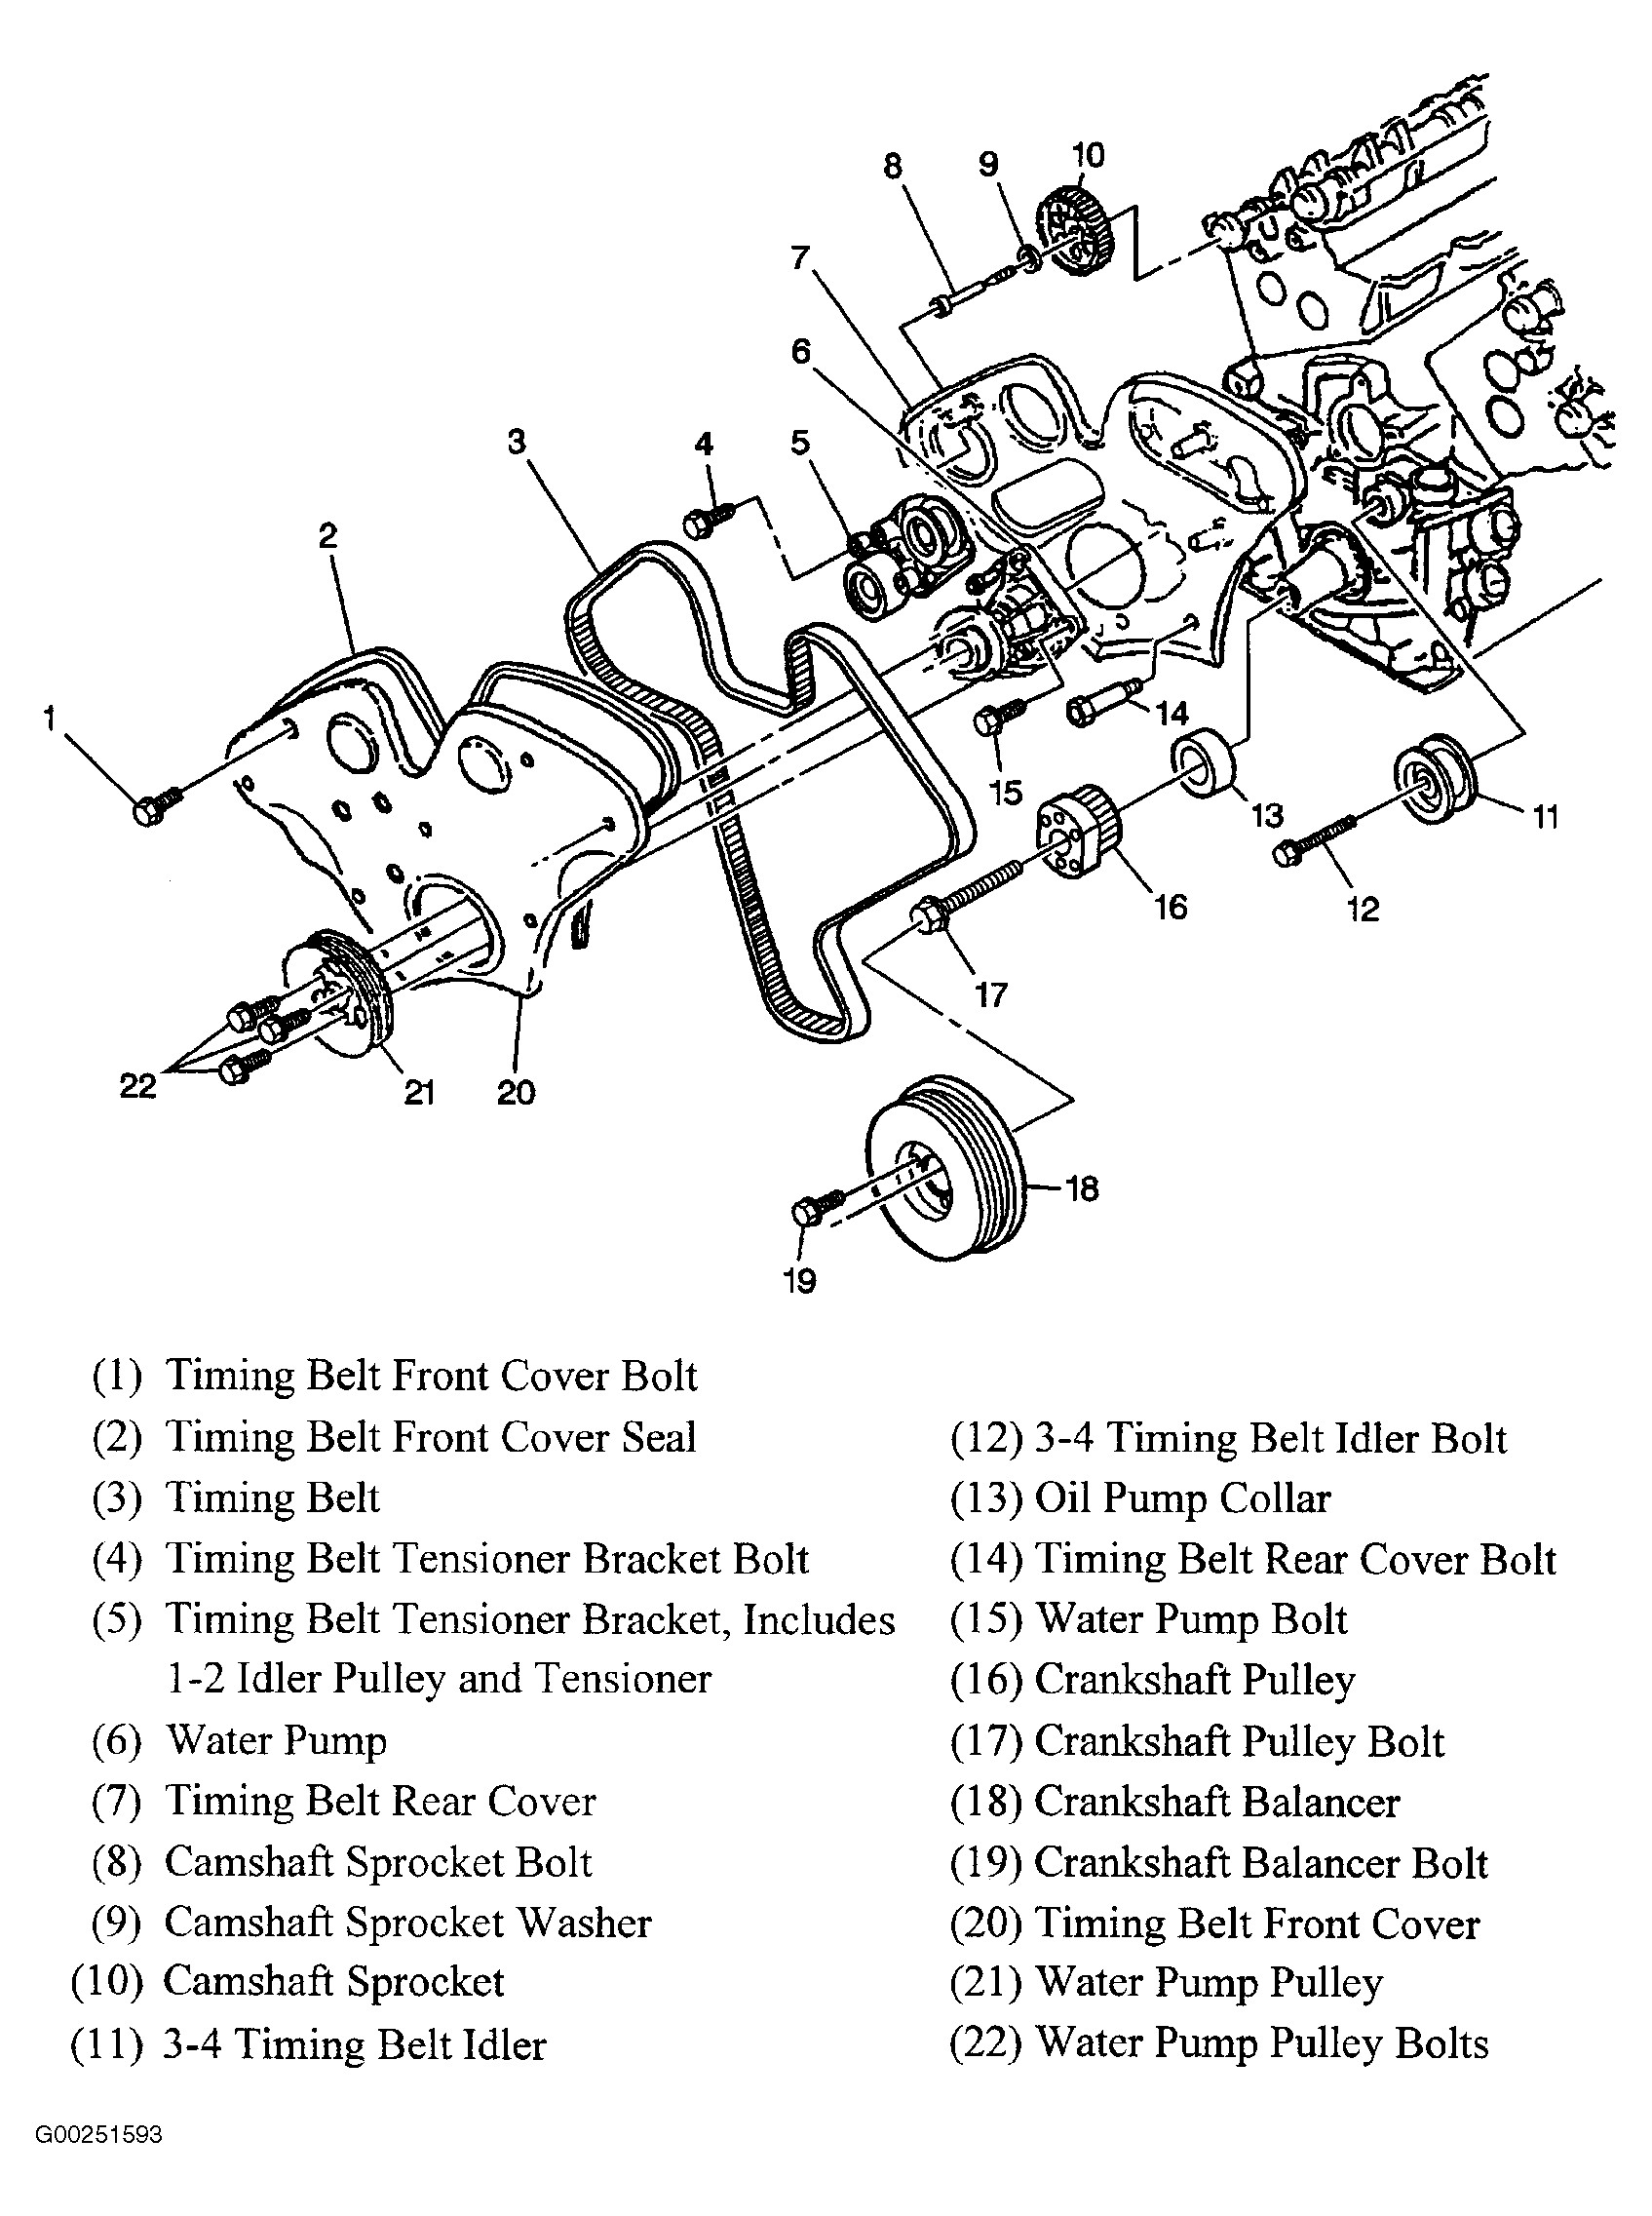 Diagram Of An Engine 2003 Cadillac Cts Serpentine Belt Diagram Auto Of Diagram Of An Engine